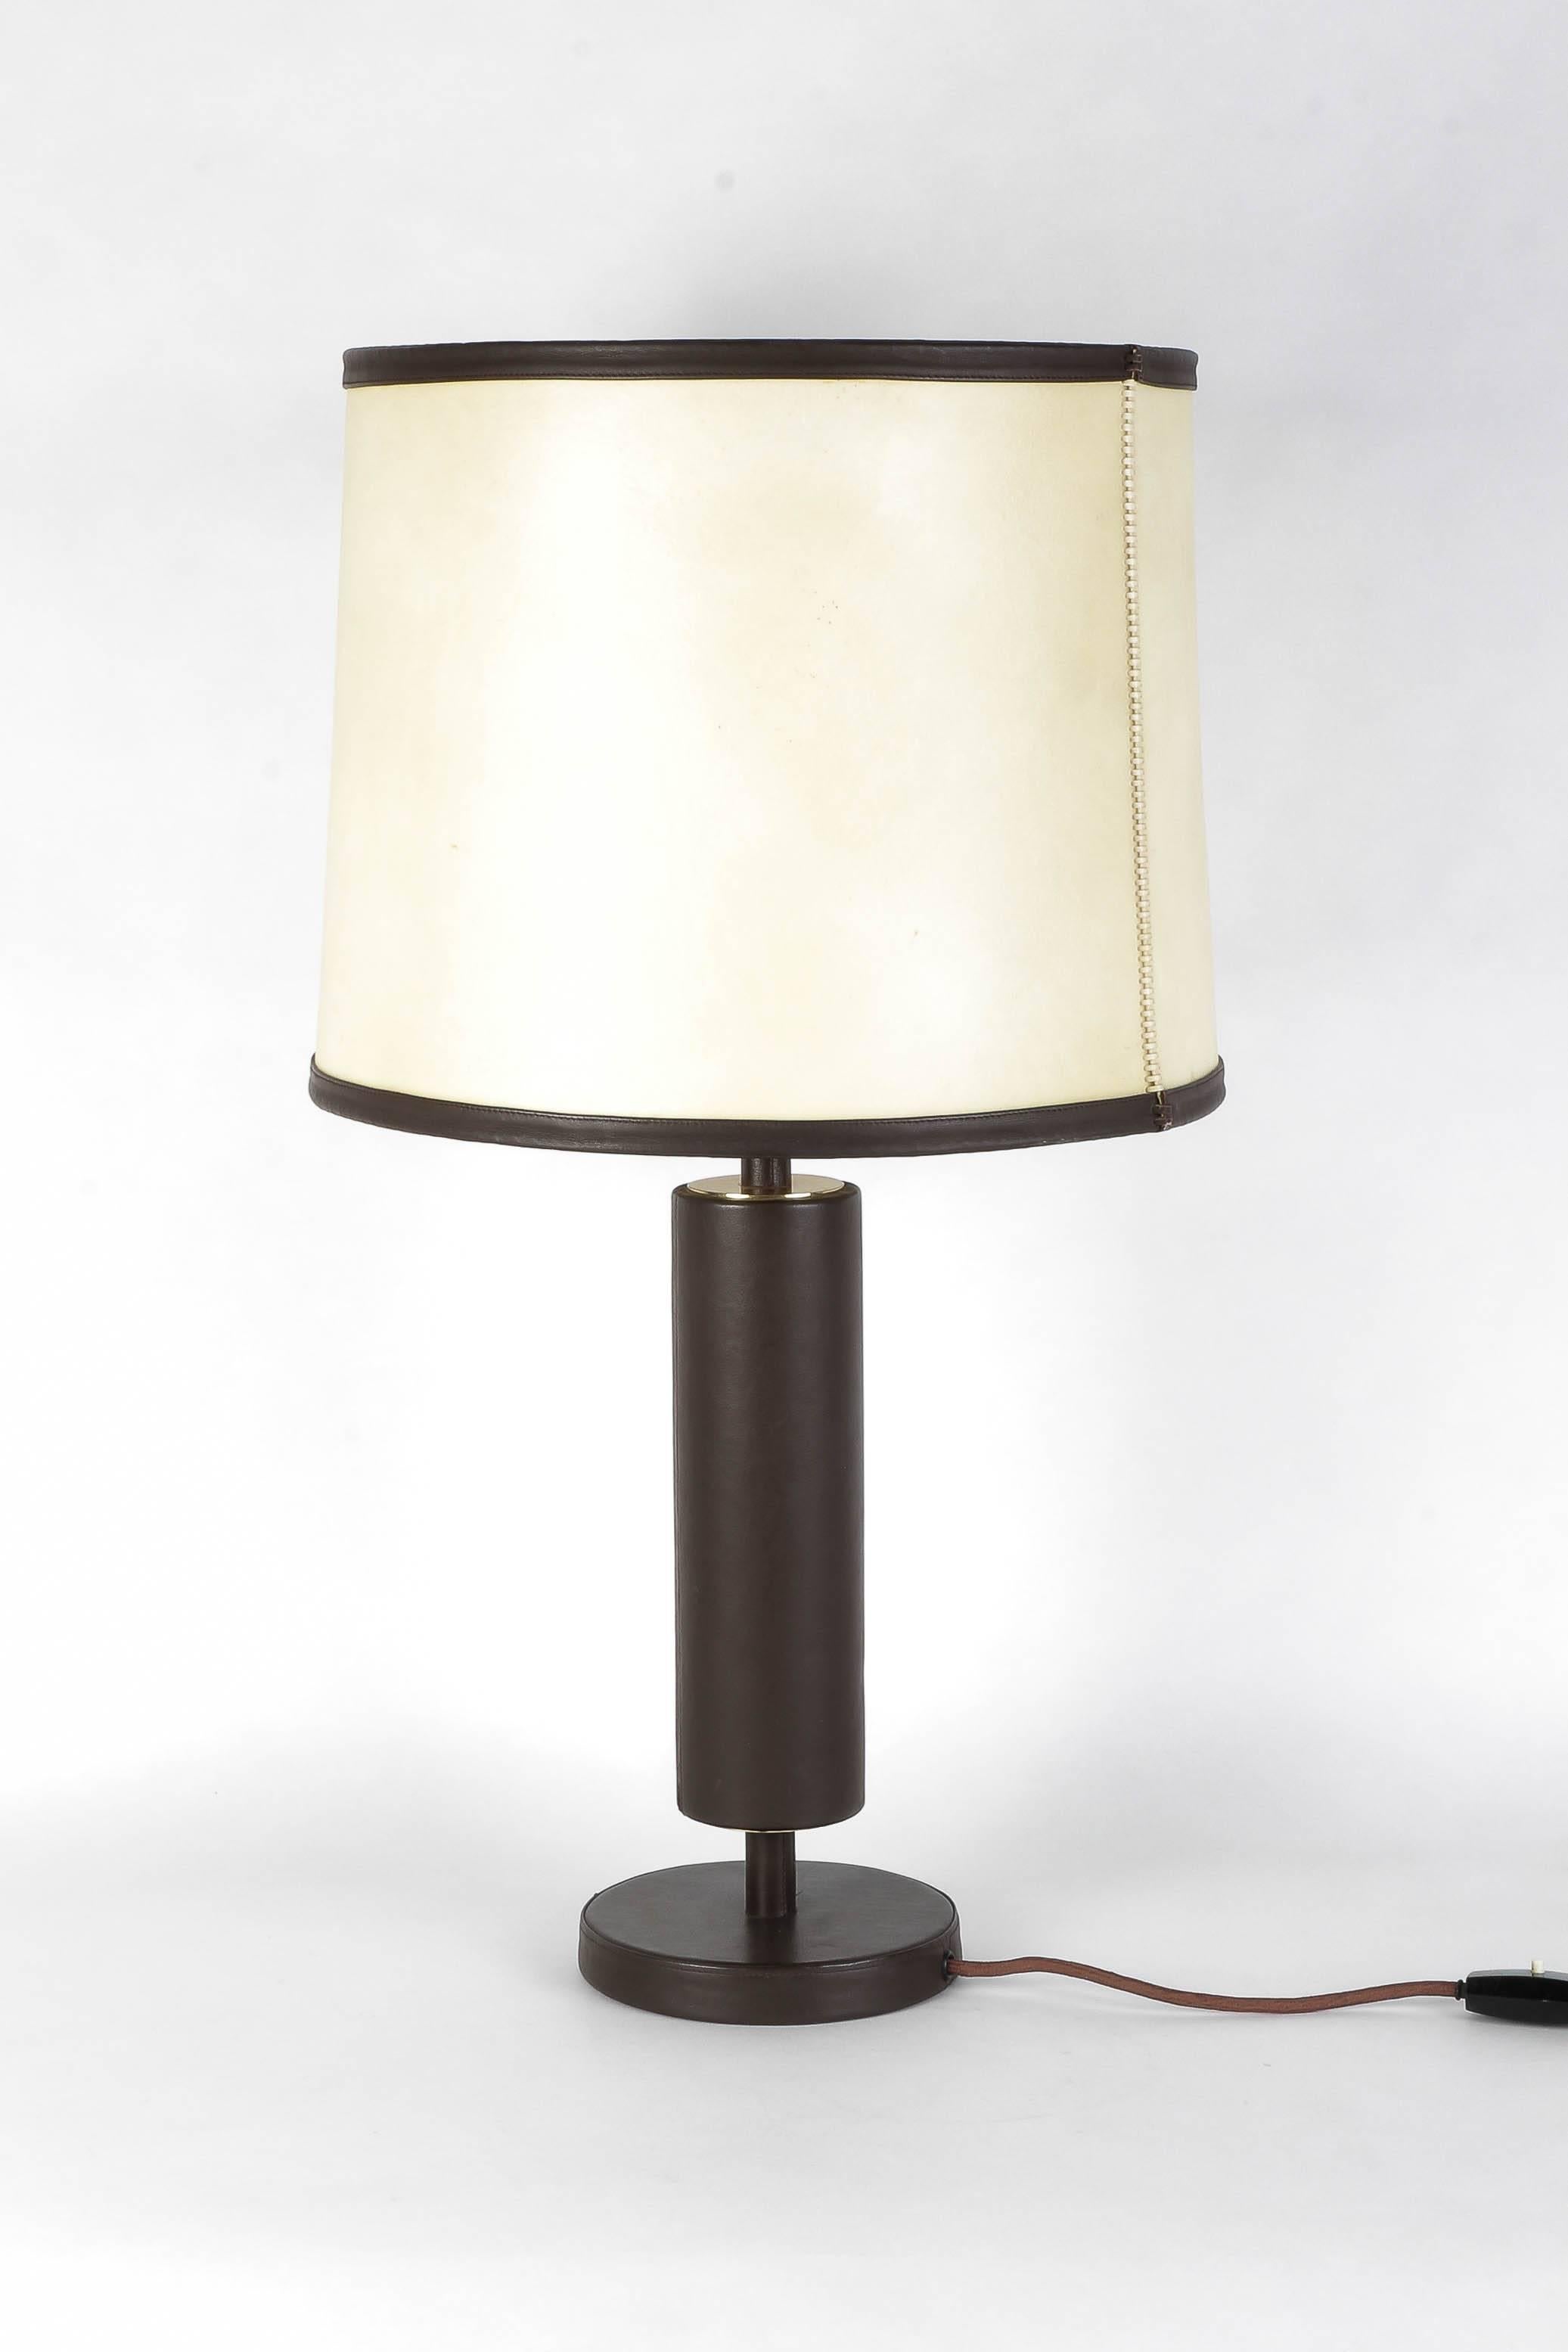 Incredible leather table lamp, manufactured in France in the 1940s. Distributed by Charlotte Wawer in Germany. Leather covered base and stem with a brass panel on border, the lampshade is made of look alike animal skin, fibre sprayed paper like